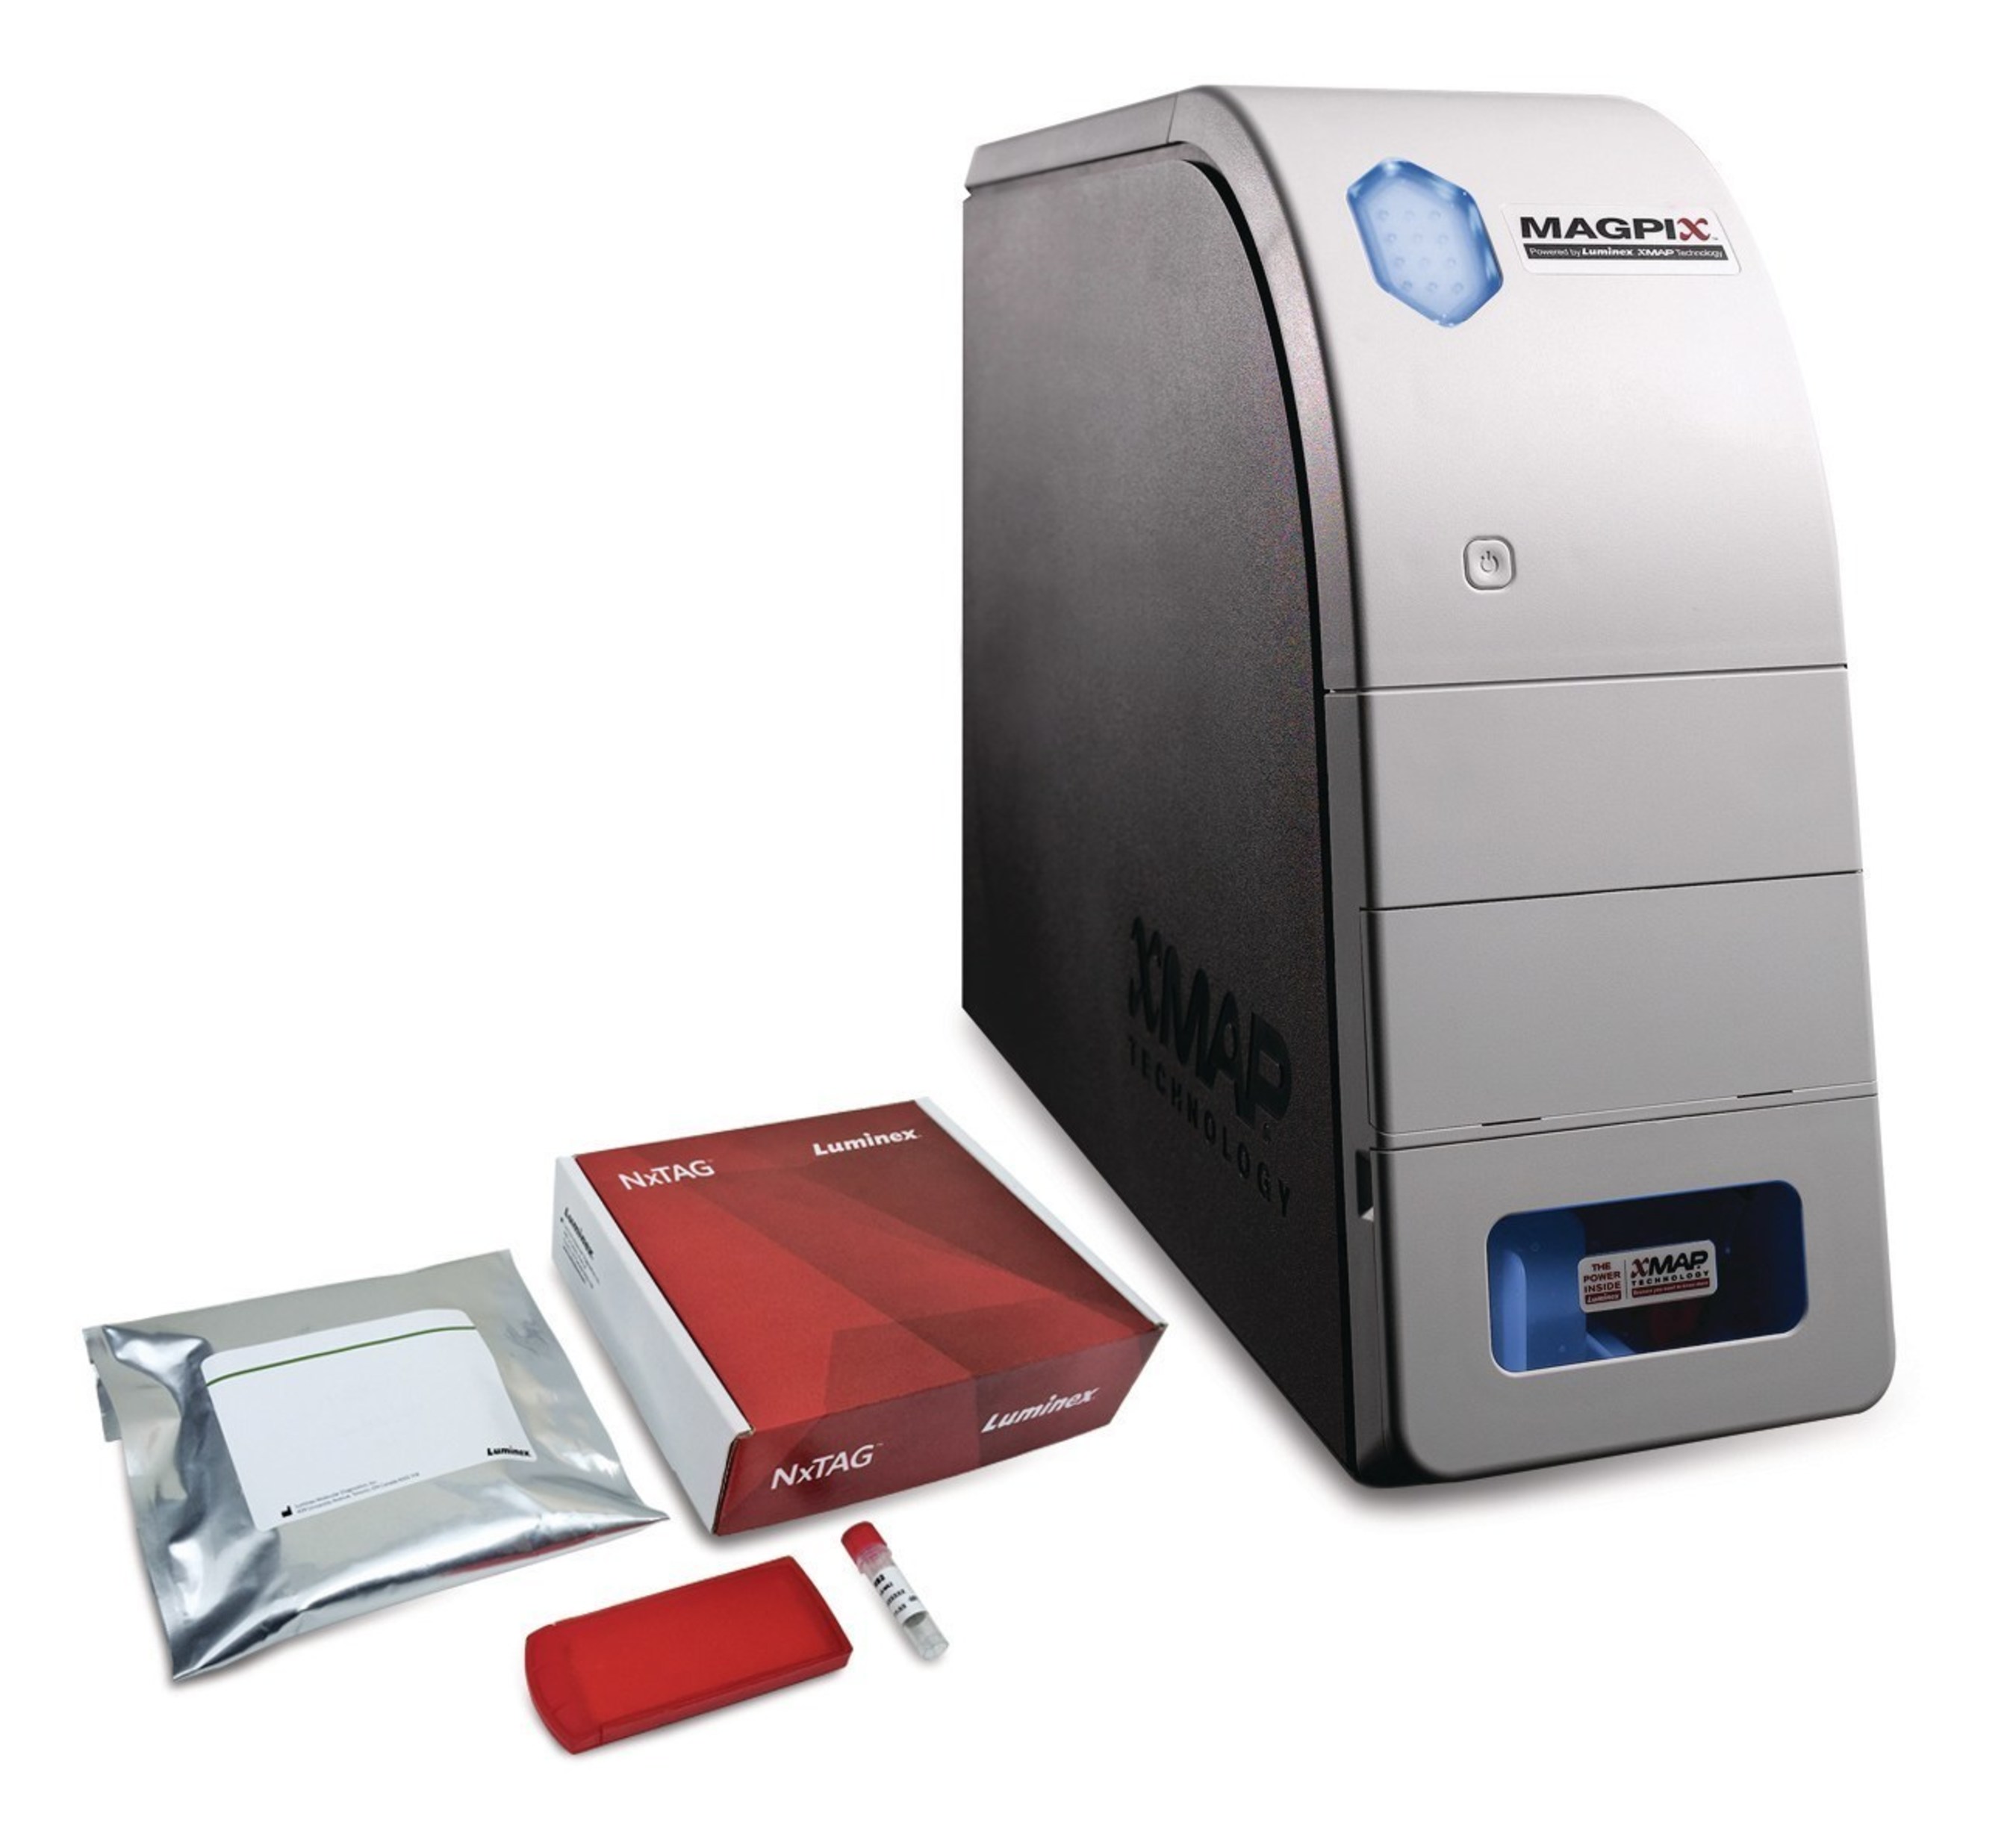 NxTAG Respiratory Pathogen Panel is an assay that detects relevant viral and bacterial respiratory pathogens, including the atypical bacteria Chlamydophila pneumoniae, Mycoplasma pneumoniae, and Legionella pneumophila.